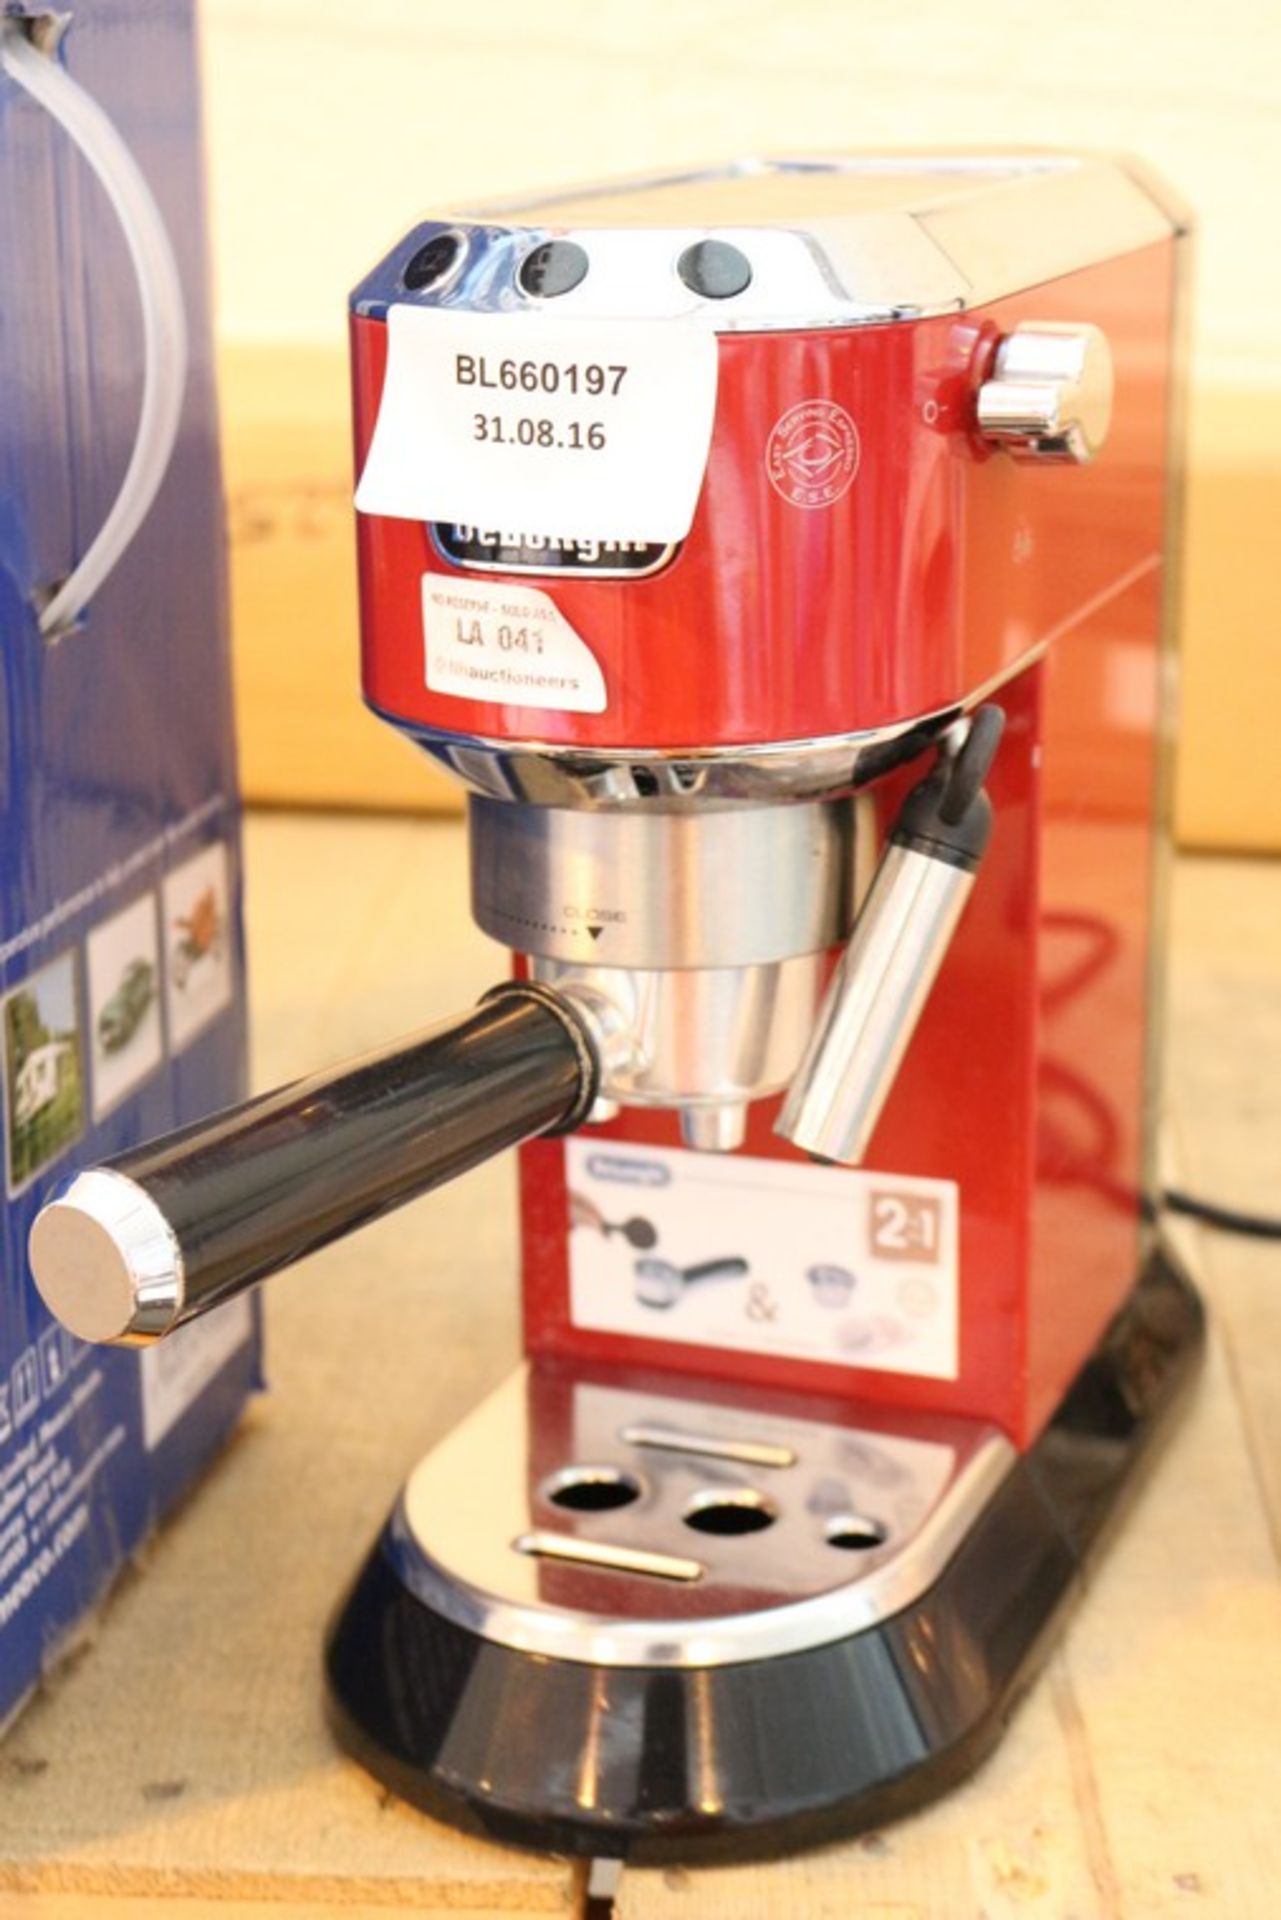 1 x DELONGHI BEAN TO CUP COFFEE MACHINE RRP £180 *PLEASE NOTE THAT THE BID PRICE IS MULTIPLIED BY